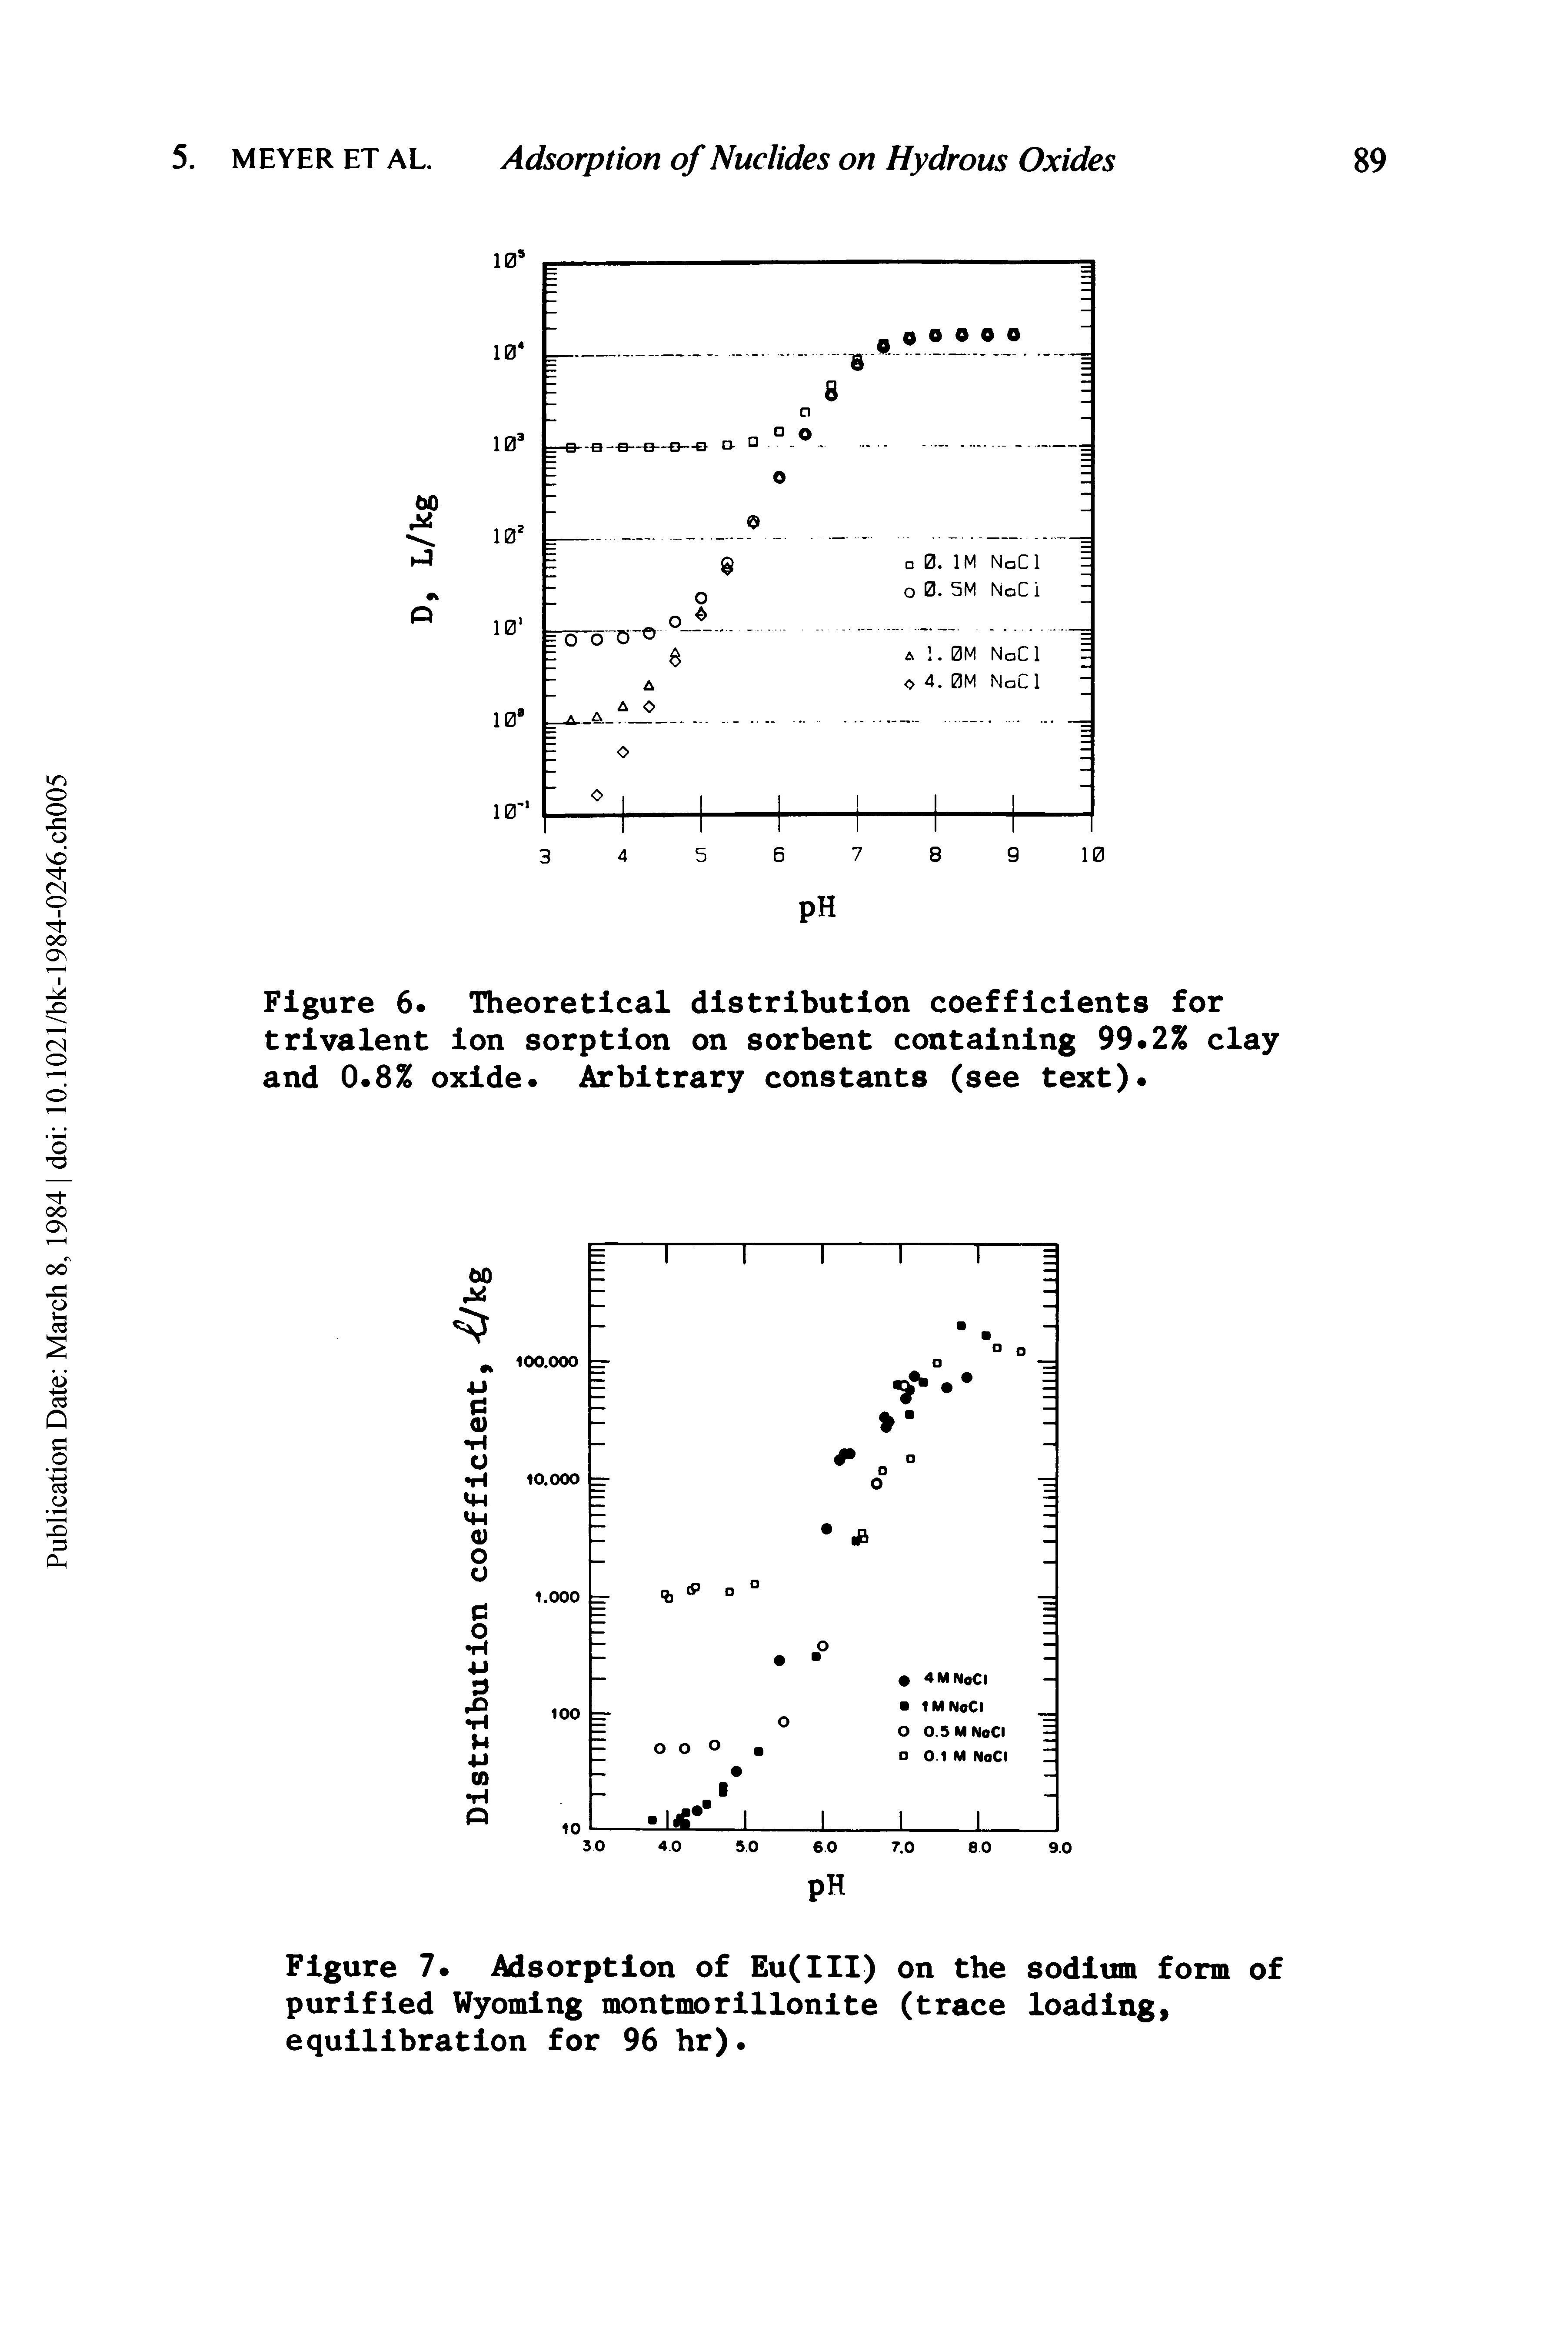 Figure 6. Theoretical distribution coefficients for trivalent ion sorption on sorbent containing 99.2% clay and 0.8% oxide. Arbitrary constants (see text).